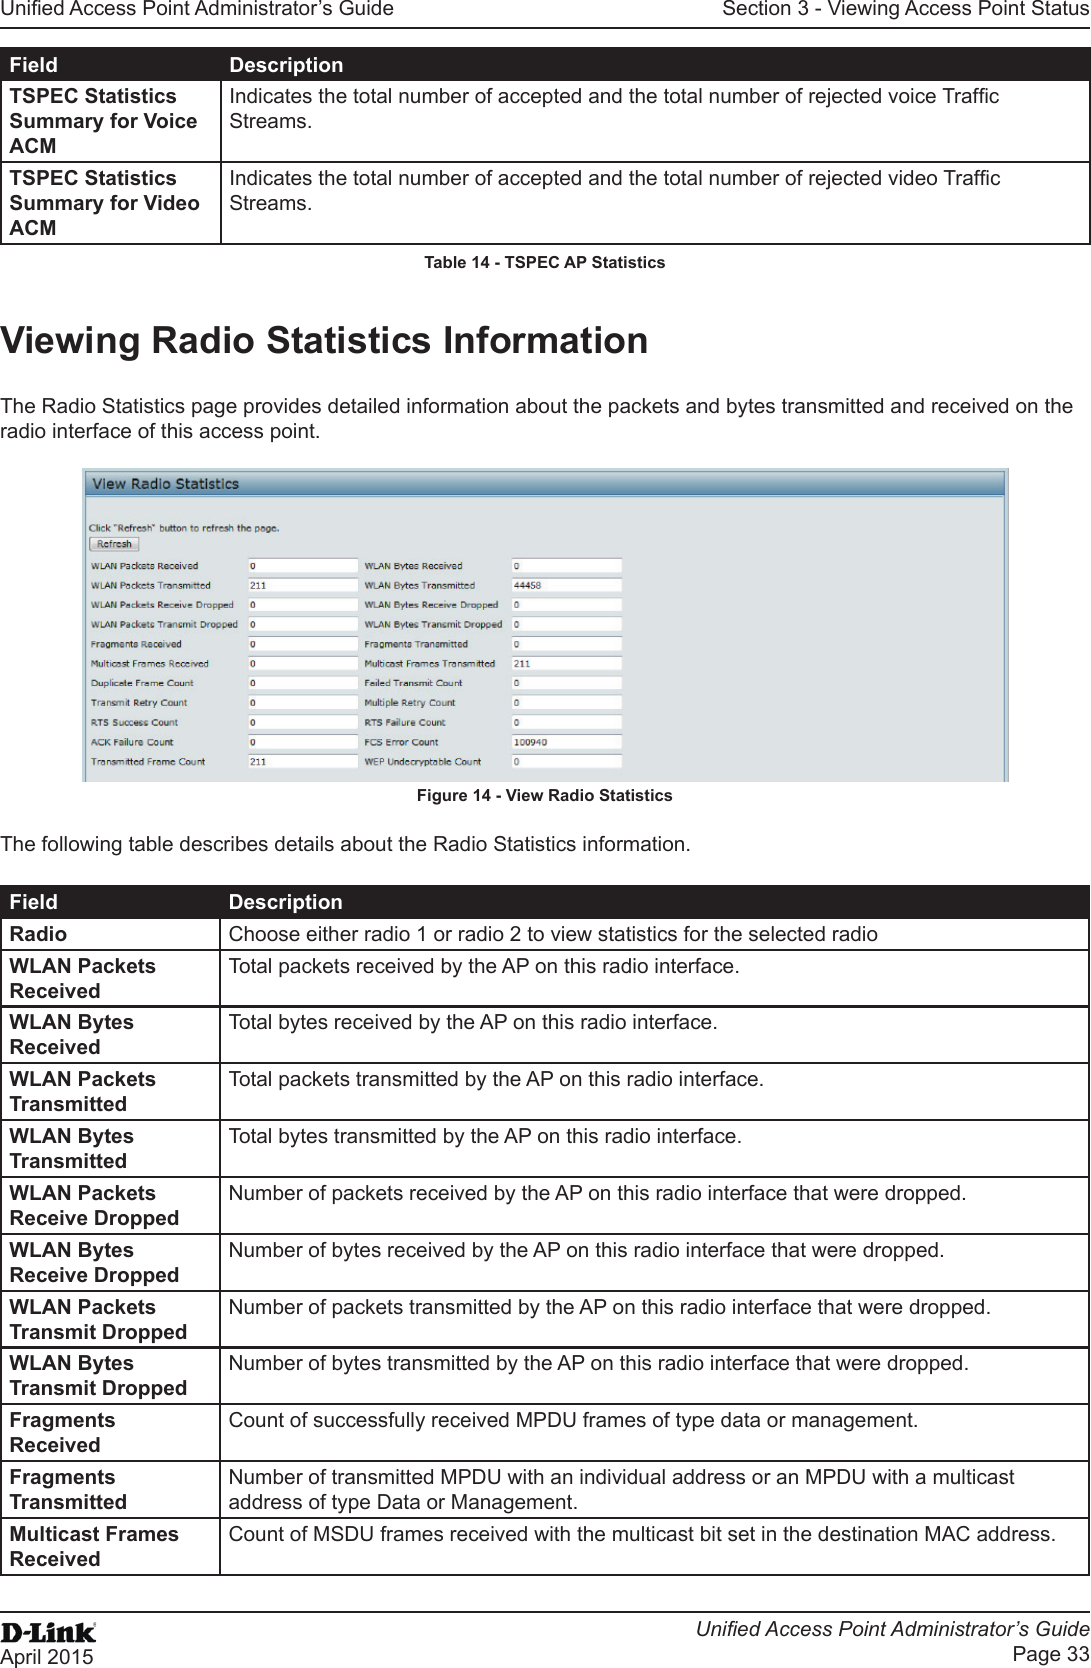 Unied Access Point Administrator’s GuideUnied Access Point Administrator’s GuidePage 33April 2015Section 3 - Viewing Access Point StatusField DescriptionTSPEC Statistics Summary for Voice ACMIndicates the total number of accepted and the total number of rejected voice Trafc Streams.TSPEC Statistics Summary for Video ACMIndicates the total number of accepted and the total number of rejected video Trafc Streams.Table 14 - TSPEC AP StatisticsViewing Radio Statistics InformationThe Radio Statistics page provides detailed information about the packets and bytes transmitted and received on the radio interface of this access point.Figure 14 - View Radio StatisticsThe following table describes details about the Radio Statistics information.Field DescriptionRadio Choose either radio 1 or radio 2 to view statistics for the selected radioWLAN Packets ReceivedTotal packets received by the AP on this radio interface.WLAN Bytes ReceivedTotal bytes received by the AP on this radio interface.WLAN Packets TransmittedTotal packets transmitted by the AP on this radio interface.WLAN Bytes TransmittedTotal bytes transmitted by the AP on this radio interface.WLAN Packets Receive DroppedNumber of packets received by the AP on this radio interface that were dropped.WLAN Bytes Receive DroppedNumber of bytes received by the AP on this radio interface that were dropped.WLAN Packets Transmit DroppedNumber of packets transmitted by the AP on this radio interface that were dropped.WLAN Bytes Transmit DroppedNumber of bytes transmitted by the AP on this radio interface that were dropped.Fragments ReceivedCount of successfully received MPDU frames of type data or management.Fragments TransmittedNumber of transmitted MPDU with an individual address or an MPDU with a multicast address of type Data or Management.Multicast Frames ReceivedCount of MSDU frames received with the multicast bit set in the destination MAC address.